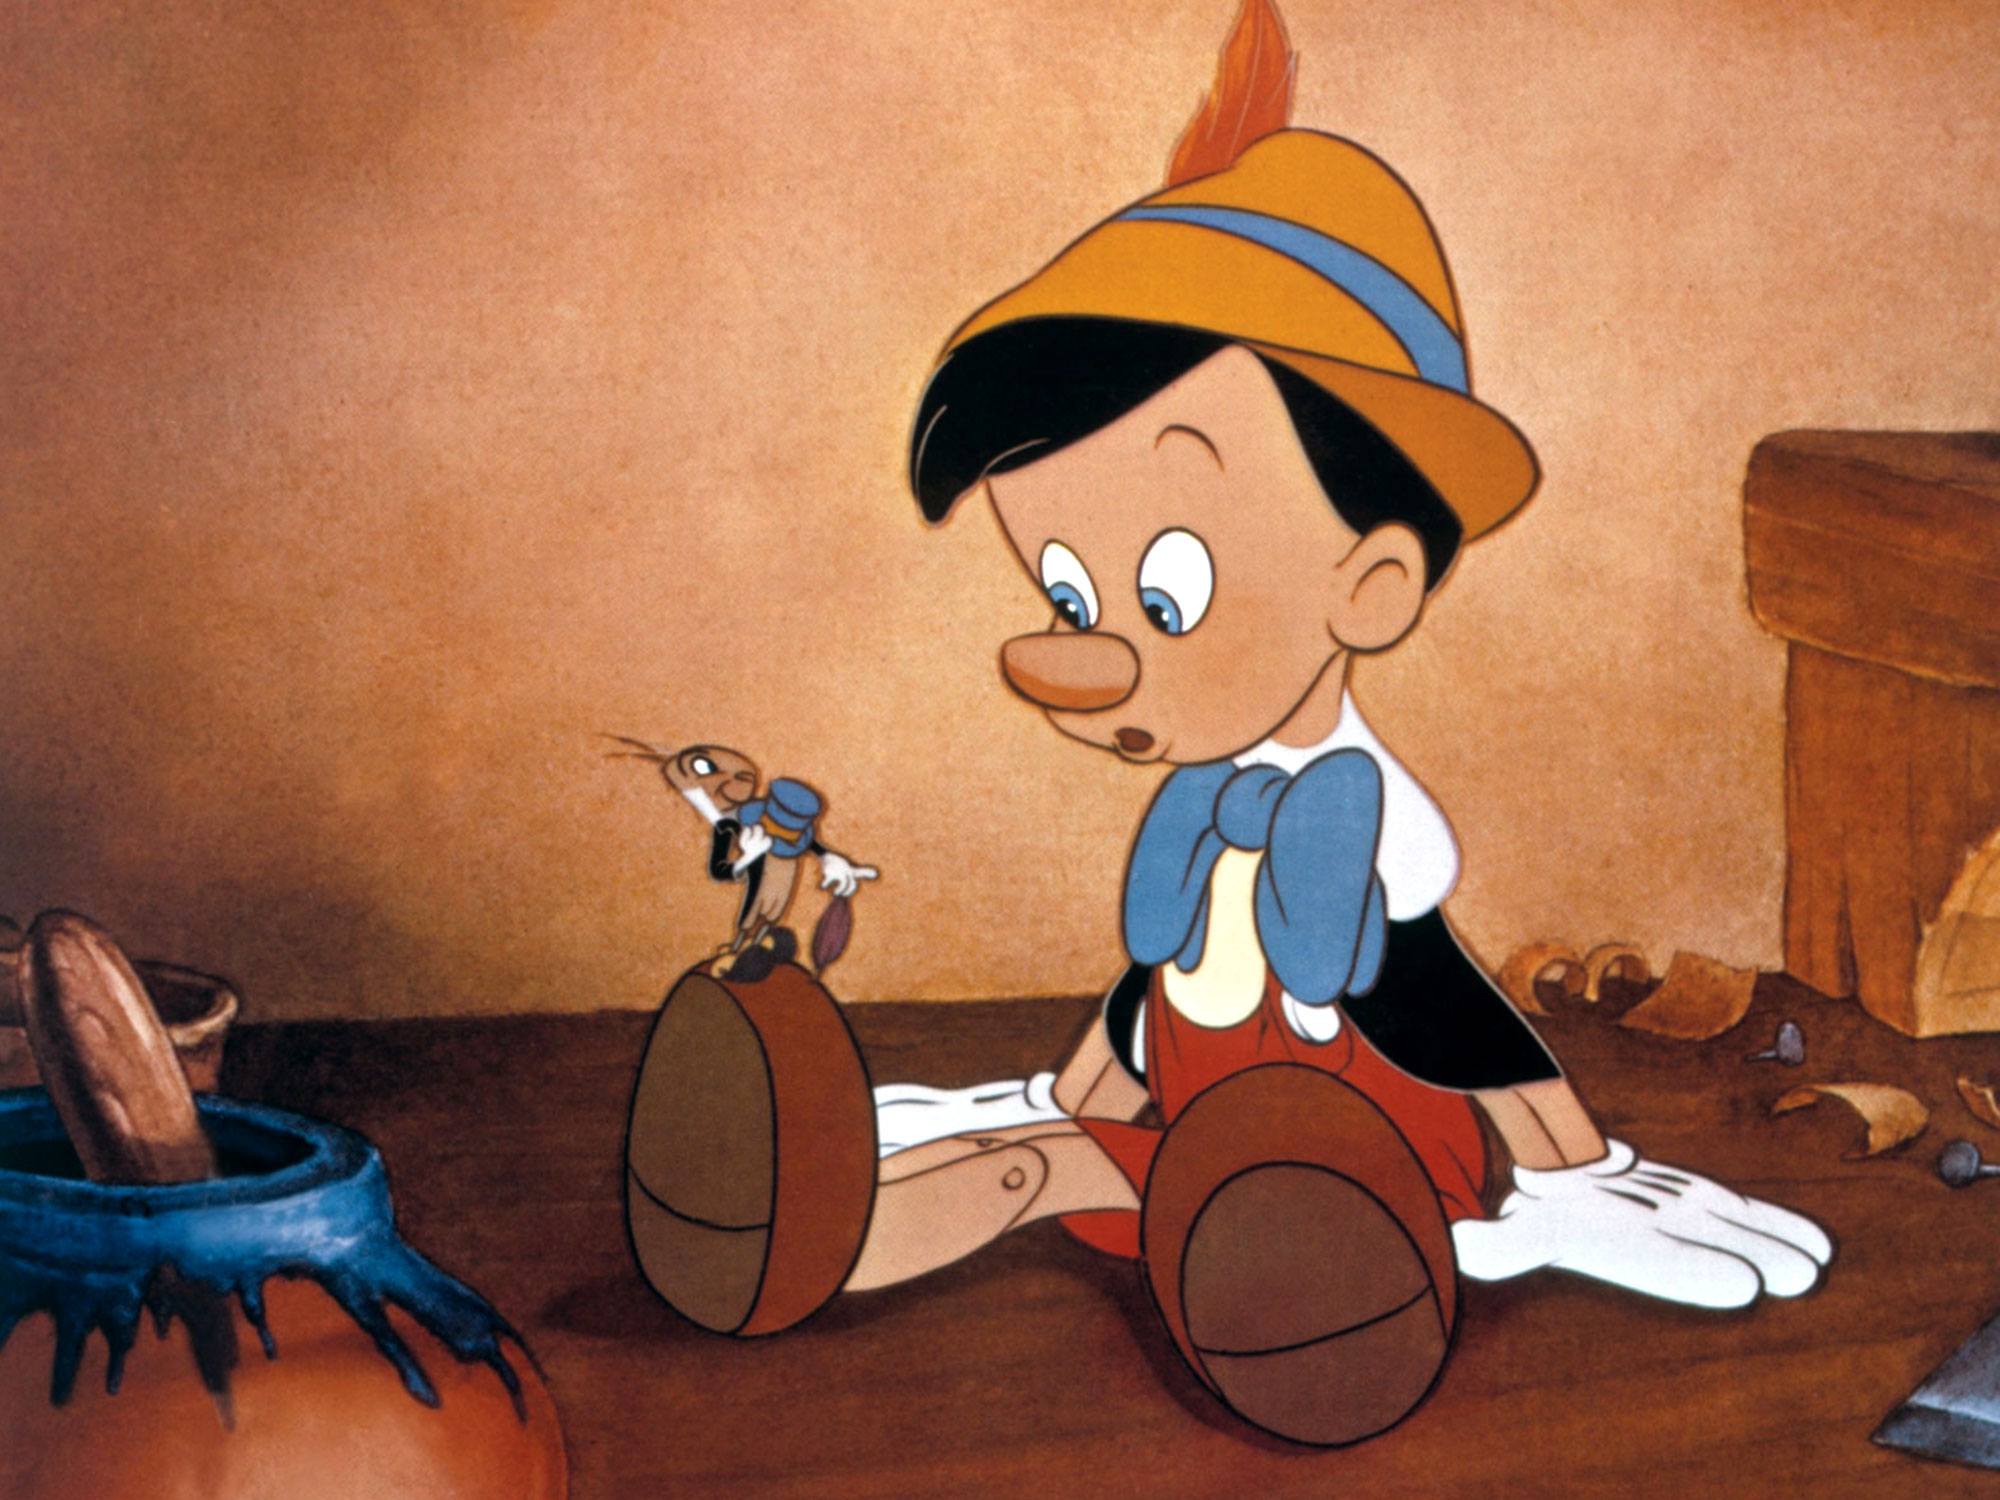 The pull of Pinocchio – How an Italian fairytale became a pop culture staple